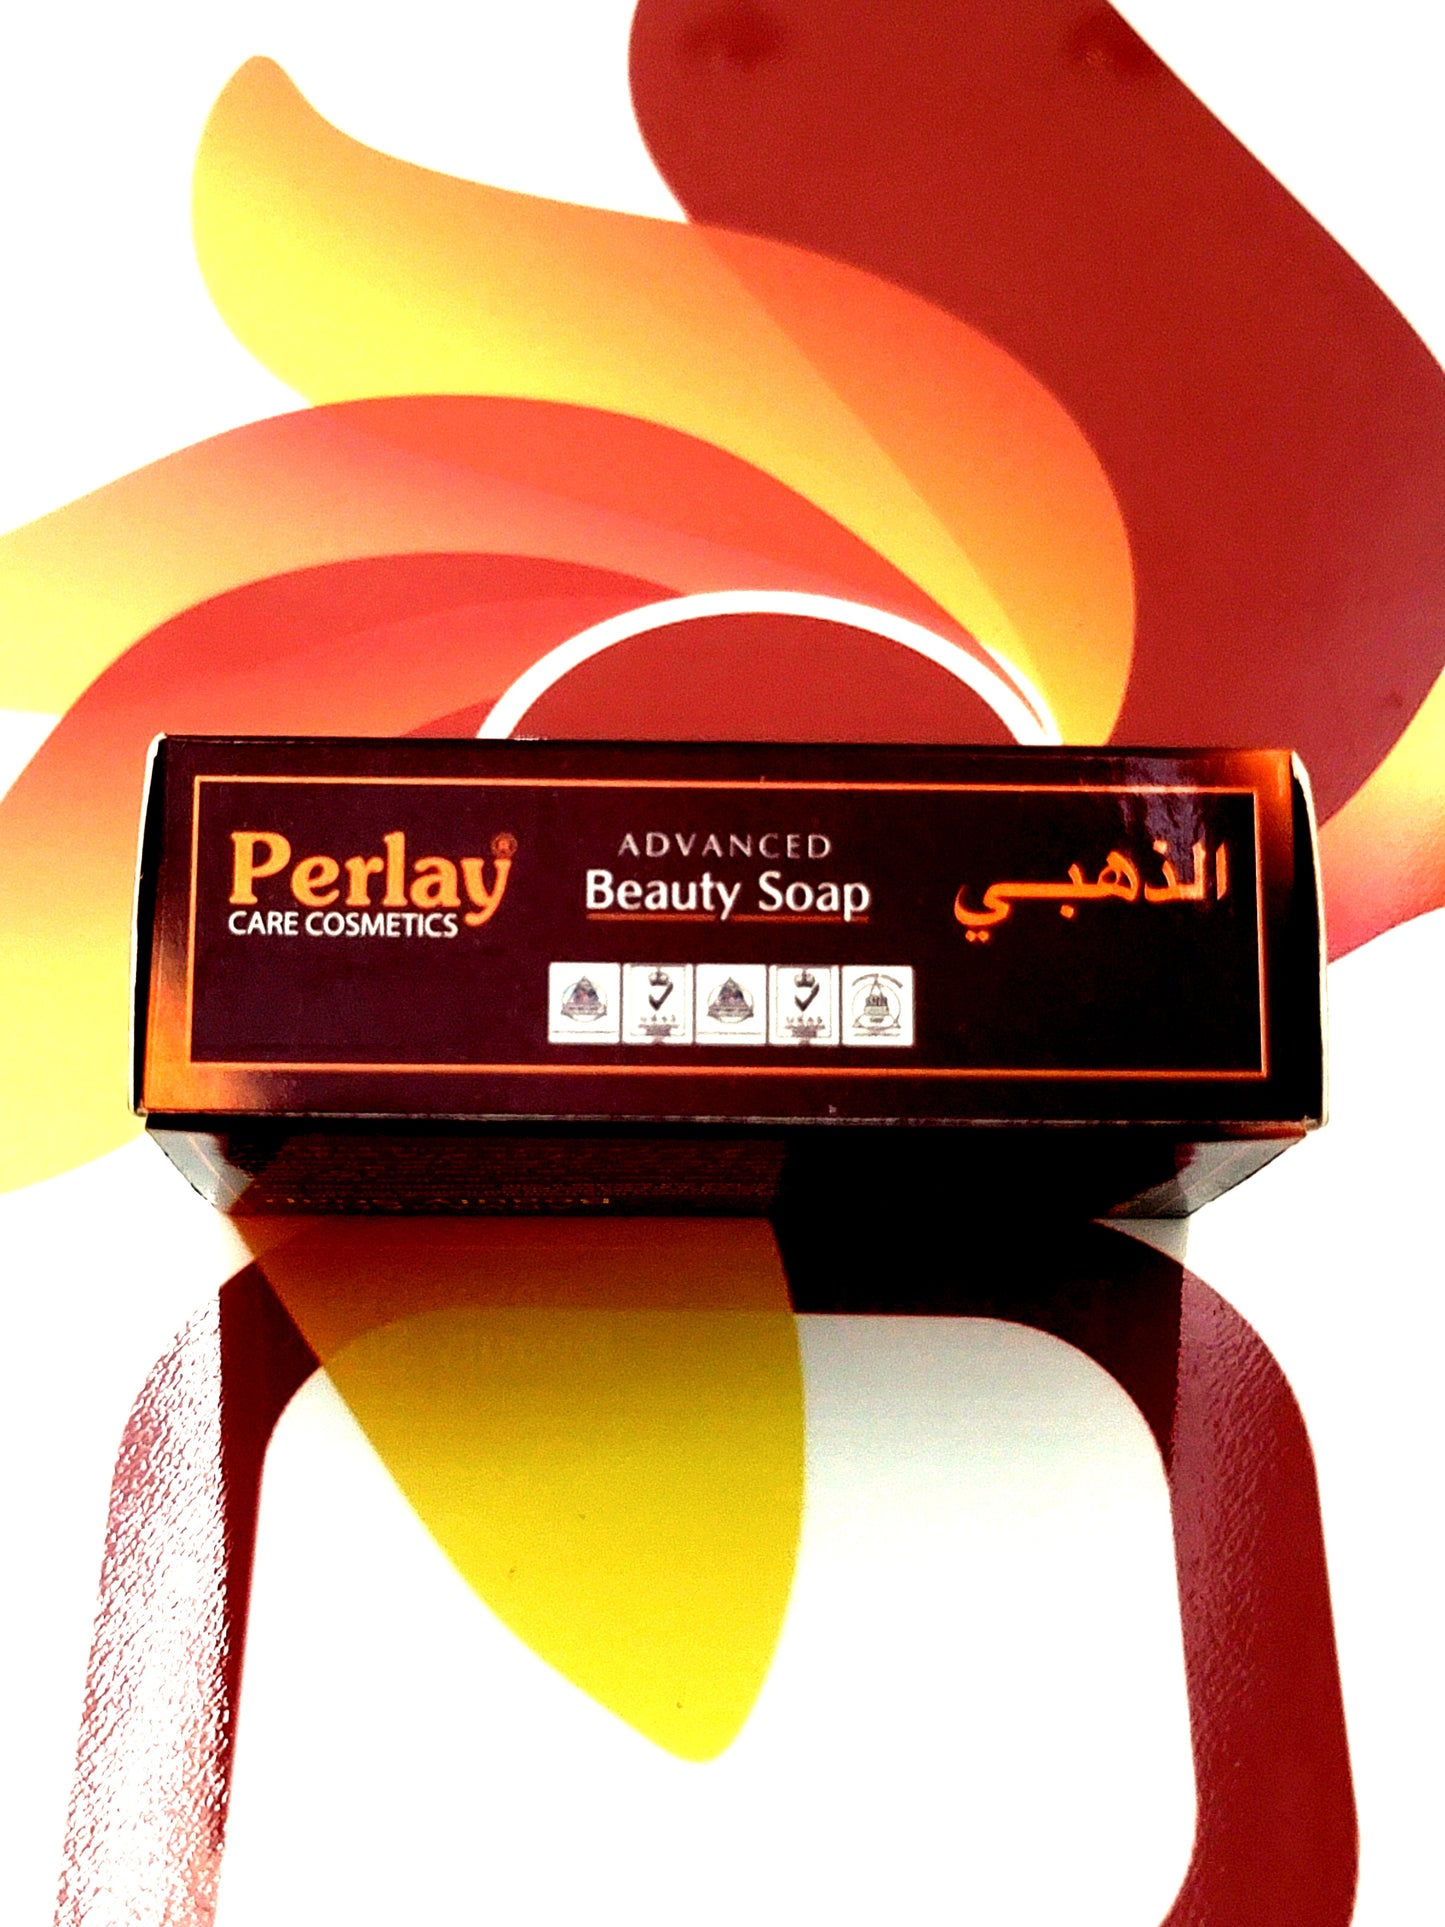 Perlay Goldie Advanced Beauty Soap